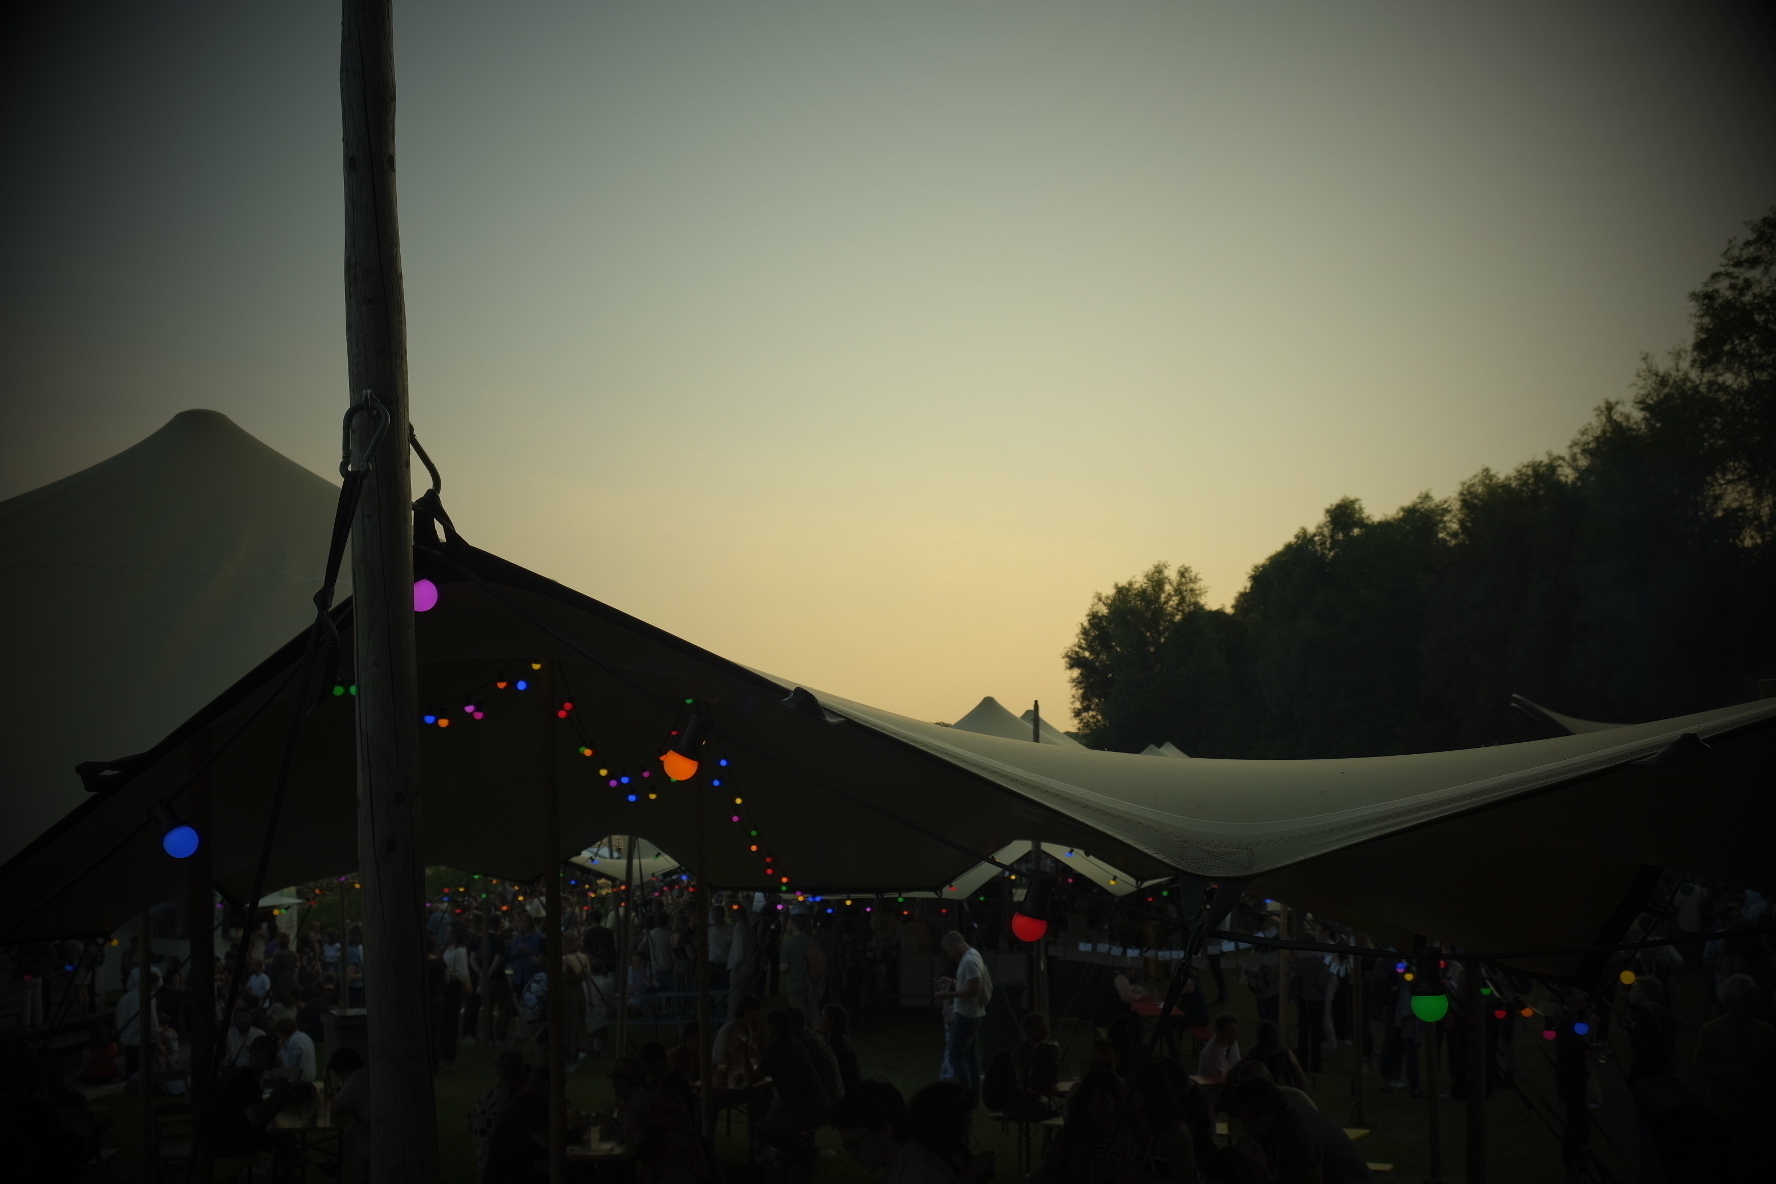 Snapshot from a party "in the forest", as it was advertised, with white tents and trees to the right. Colourful lights wherever groups of people are hiding 